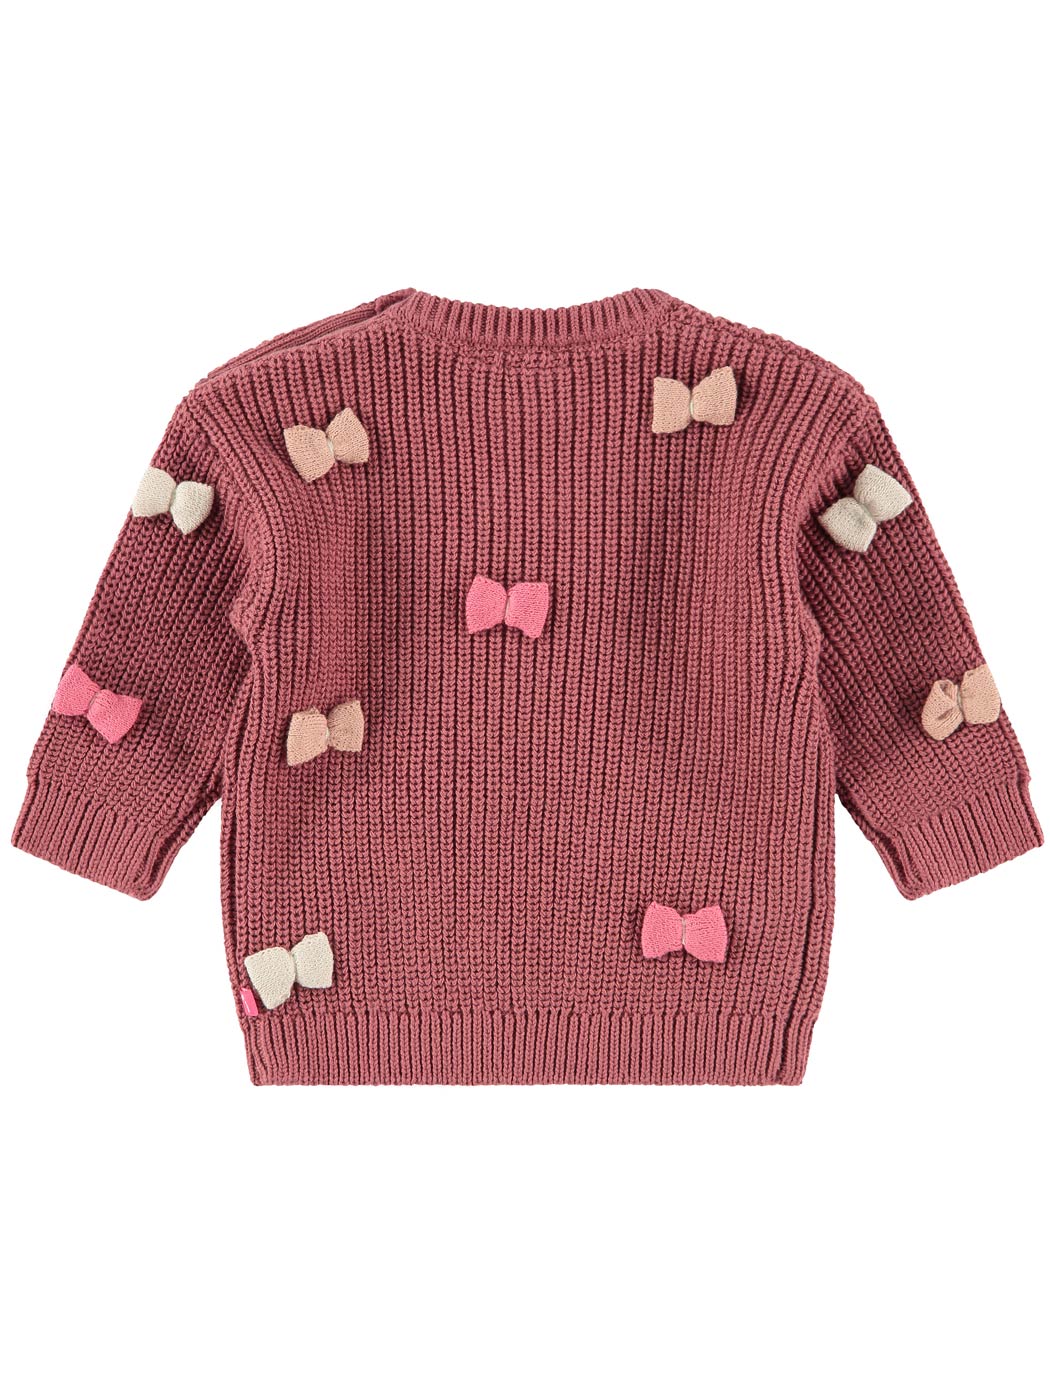 Babyface - Baby Girls pullover - NWB23628340 Pink